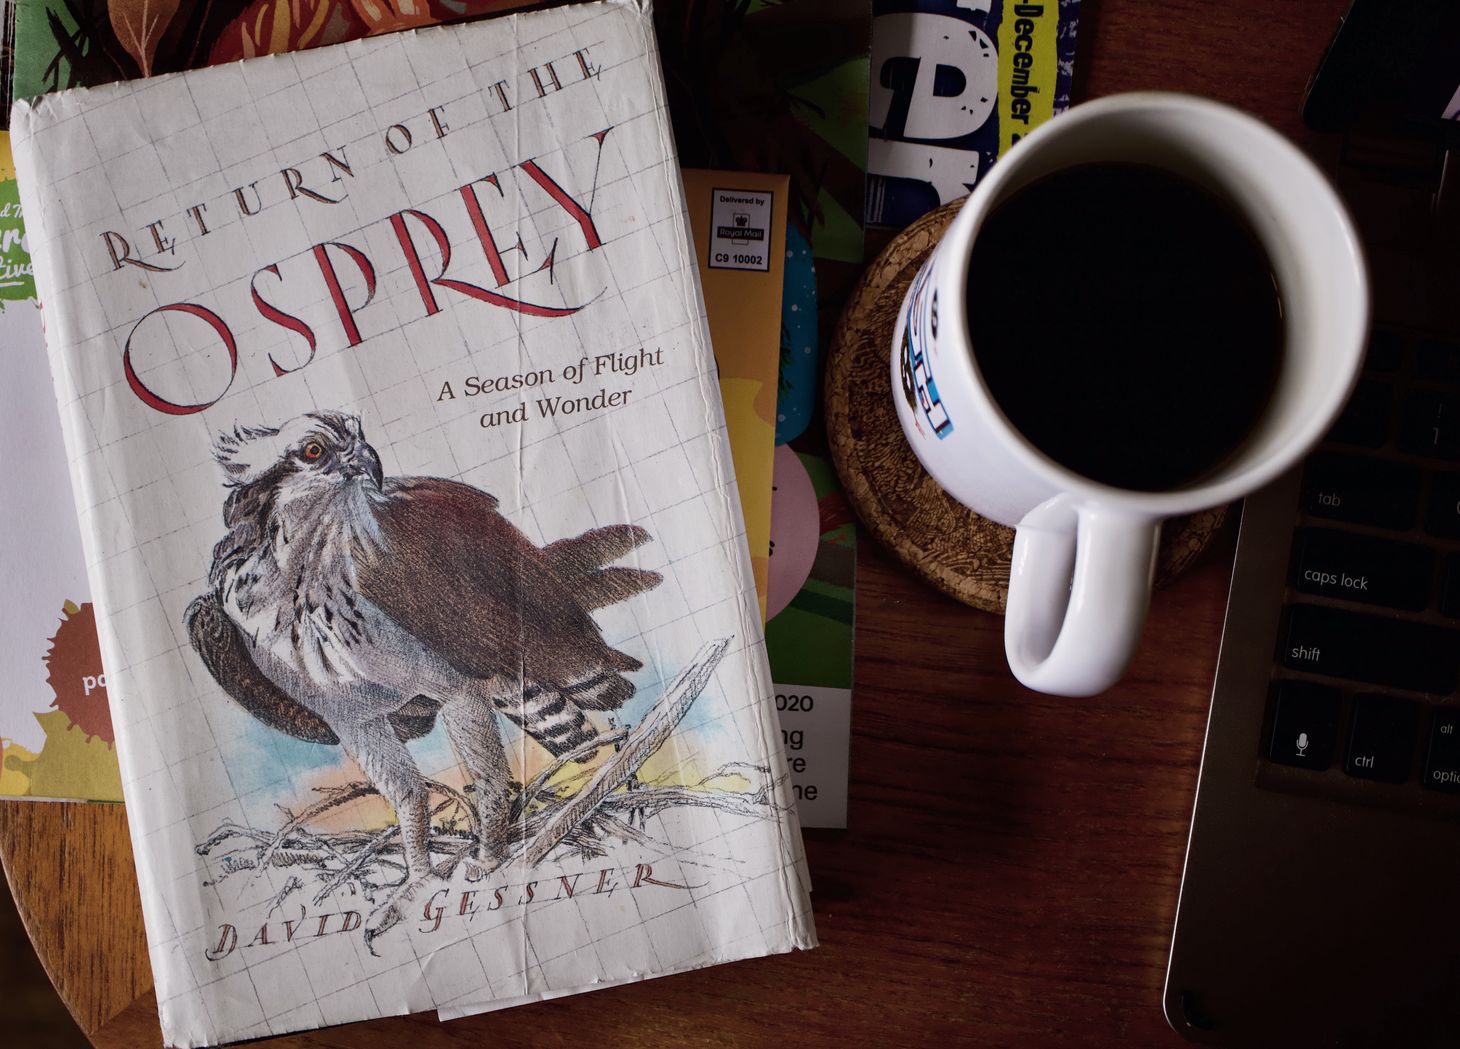 Review: Return of the Osprey by David Gassner